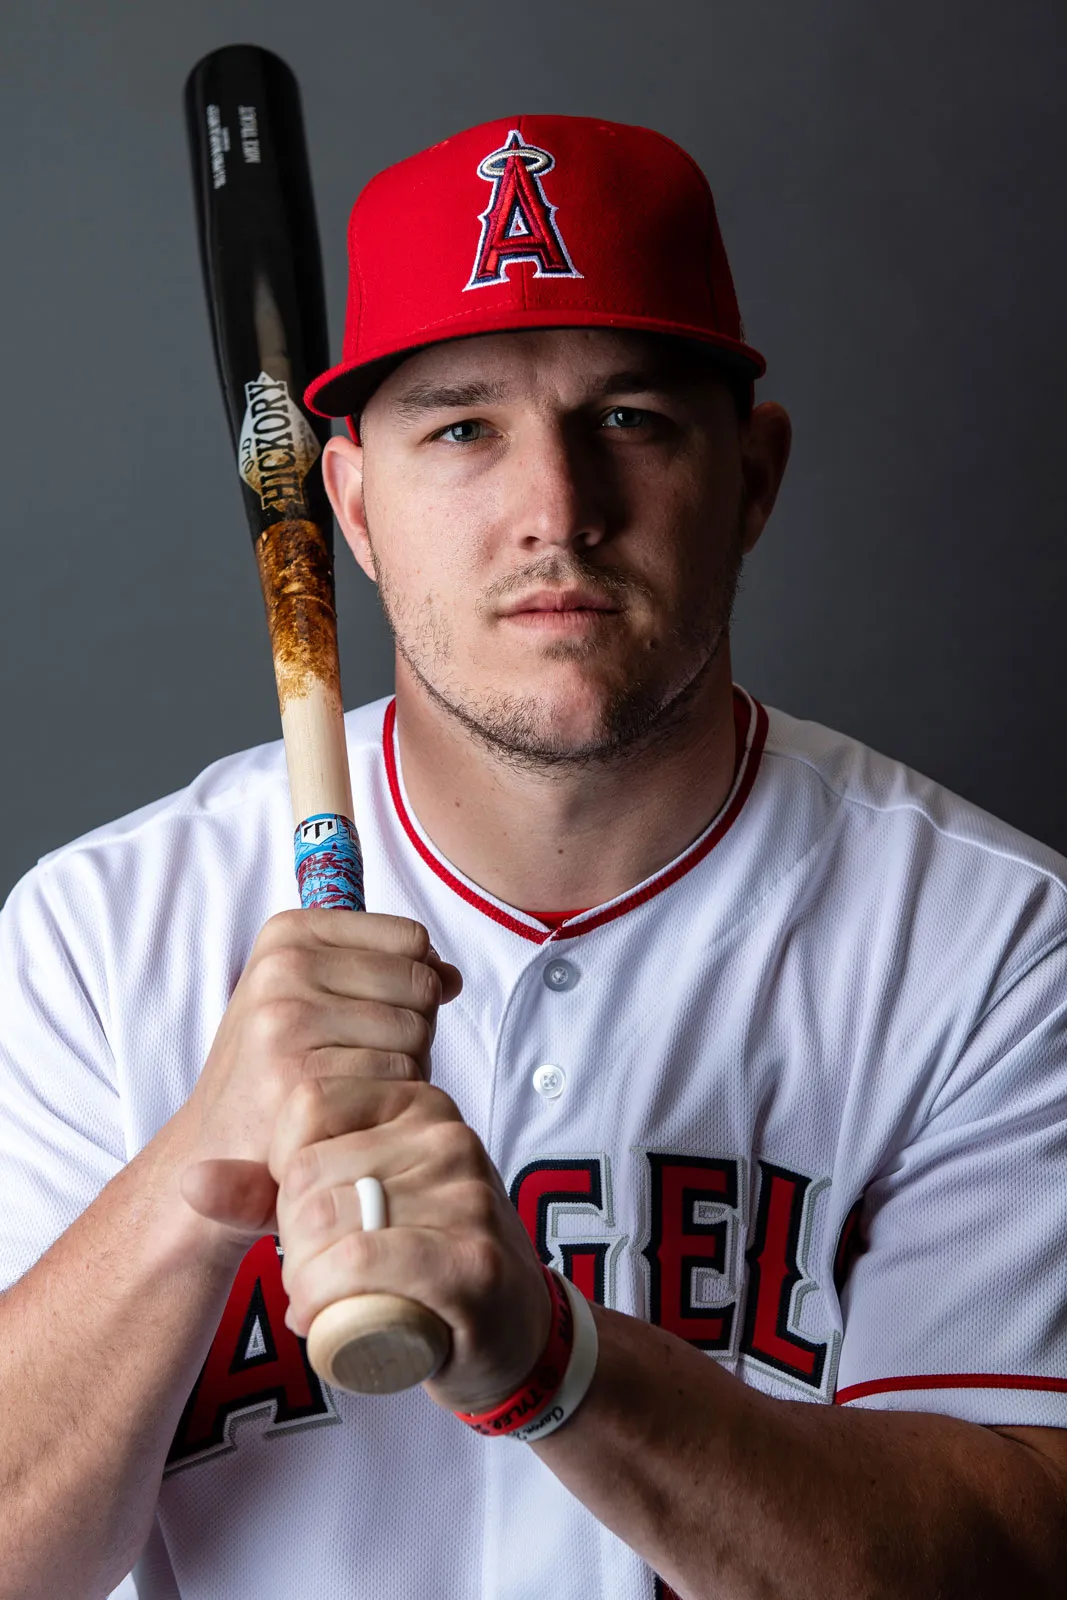 Mike Trout, the Search Graph (Source: Encyclopedia Britannica)